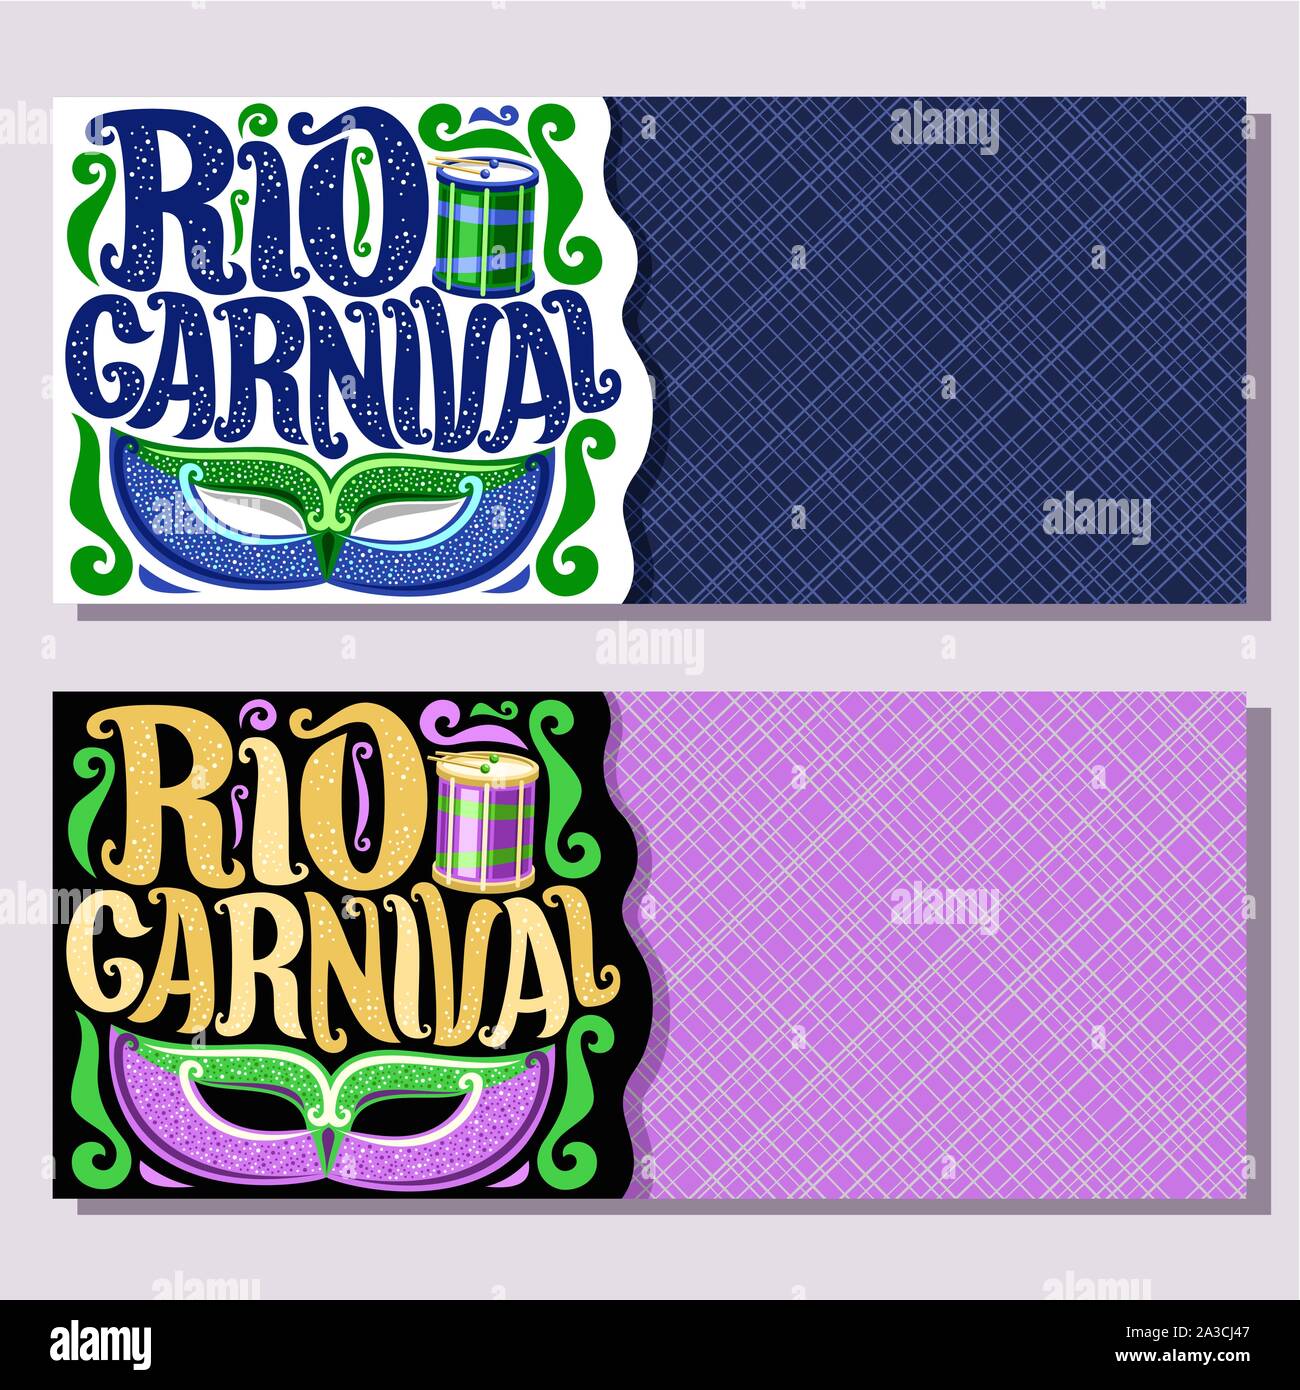 Vector banners for Rio Carnival, invite tickets with brazilian mask, original font for text rio carnival, drum with sticks for samba parade, layouts f Stock Vector